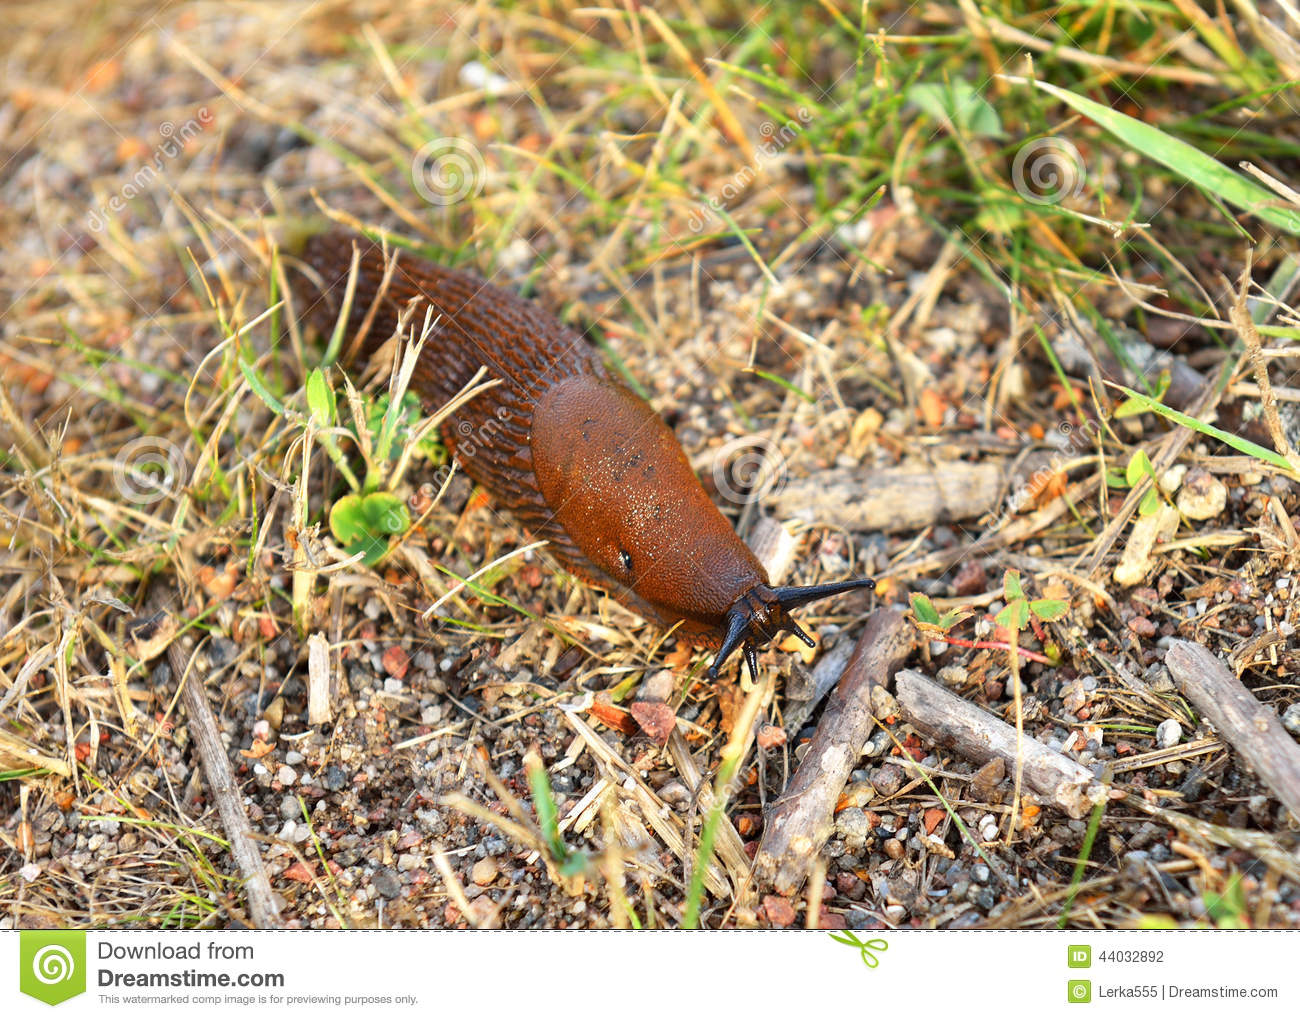 Slug Is Common Name For Apparently Shell Less Terrestrial Gastropod